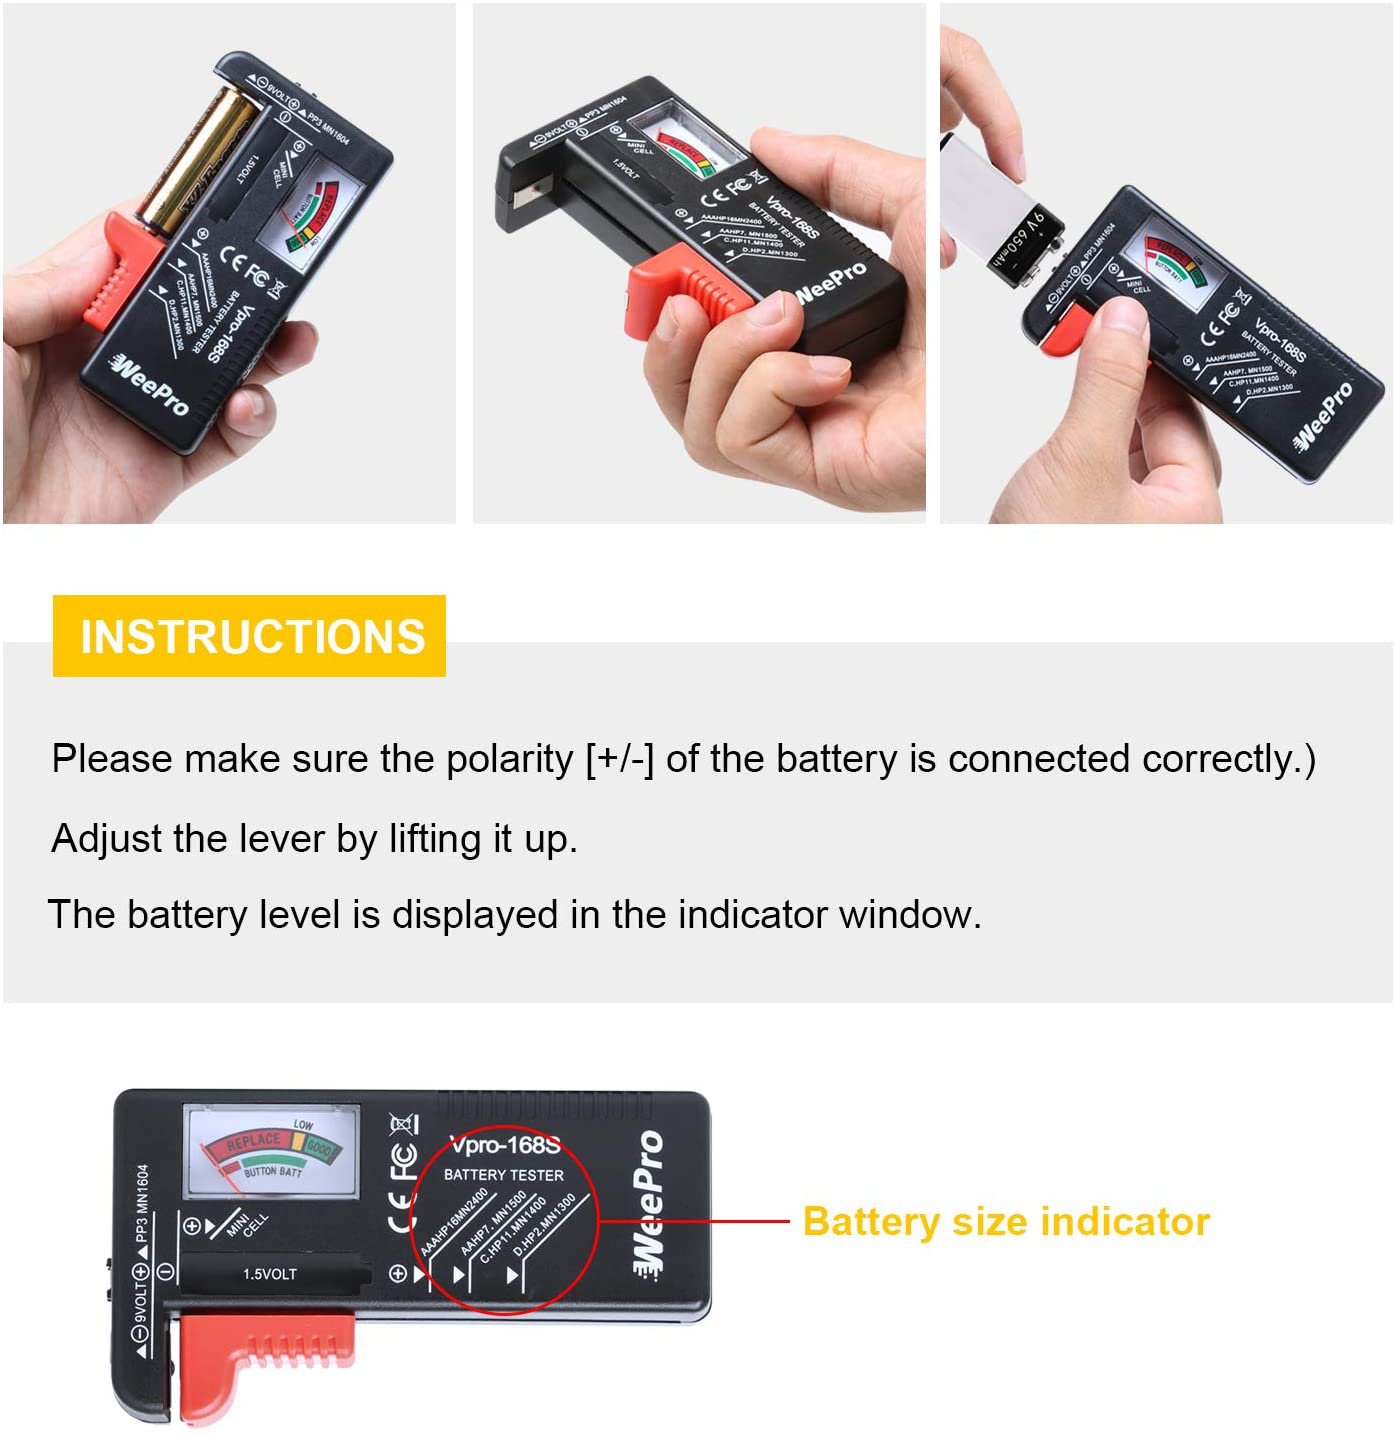 Battery Tester Checker by WeePro - Universal Battery Tester Monitor for AA AAA C D 9V 1.5V Button Cell Batteries - Household Battery Life Level Testers Power Meter